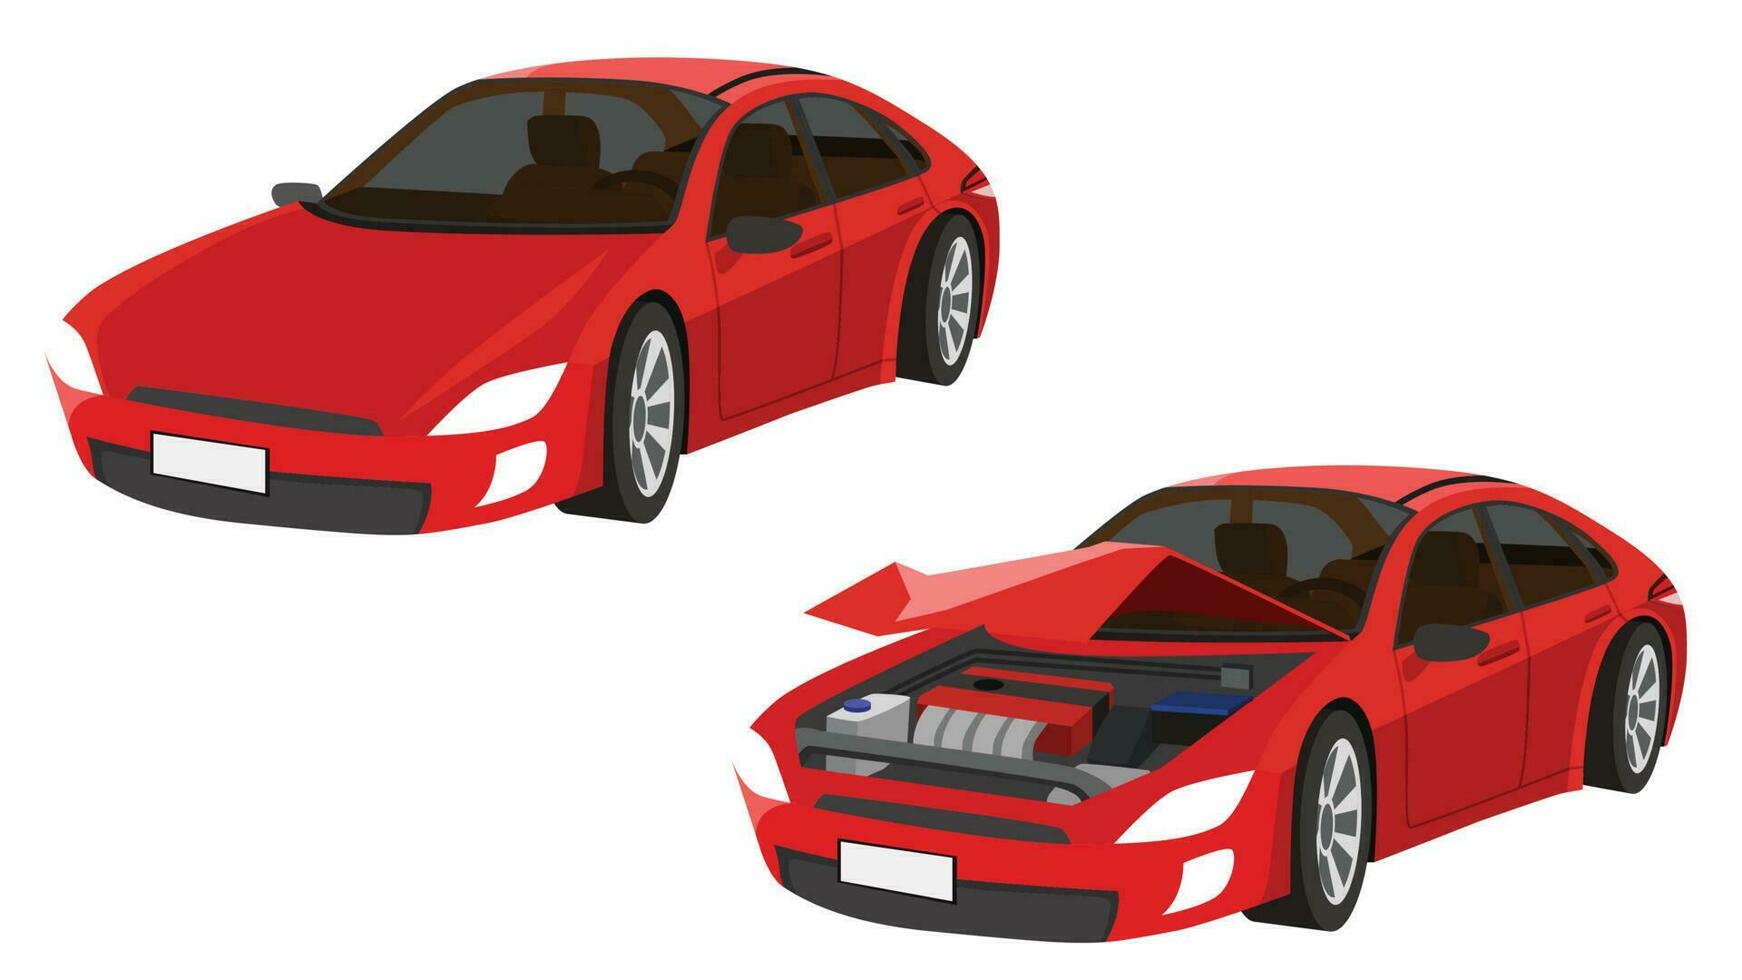 Cartoon vector or illustration isomatic. Status of the red sport car from normal car to the car was slightly damaged. Severely damaged front broken open hood.